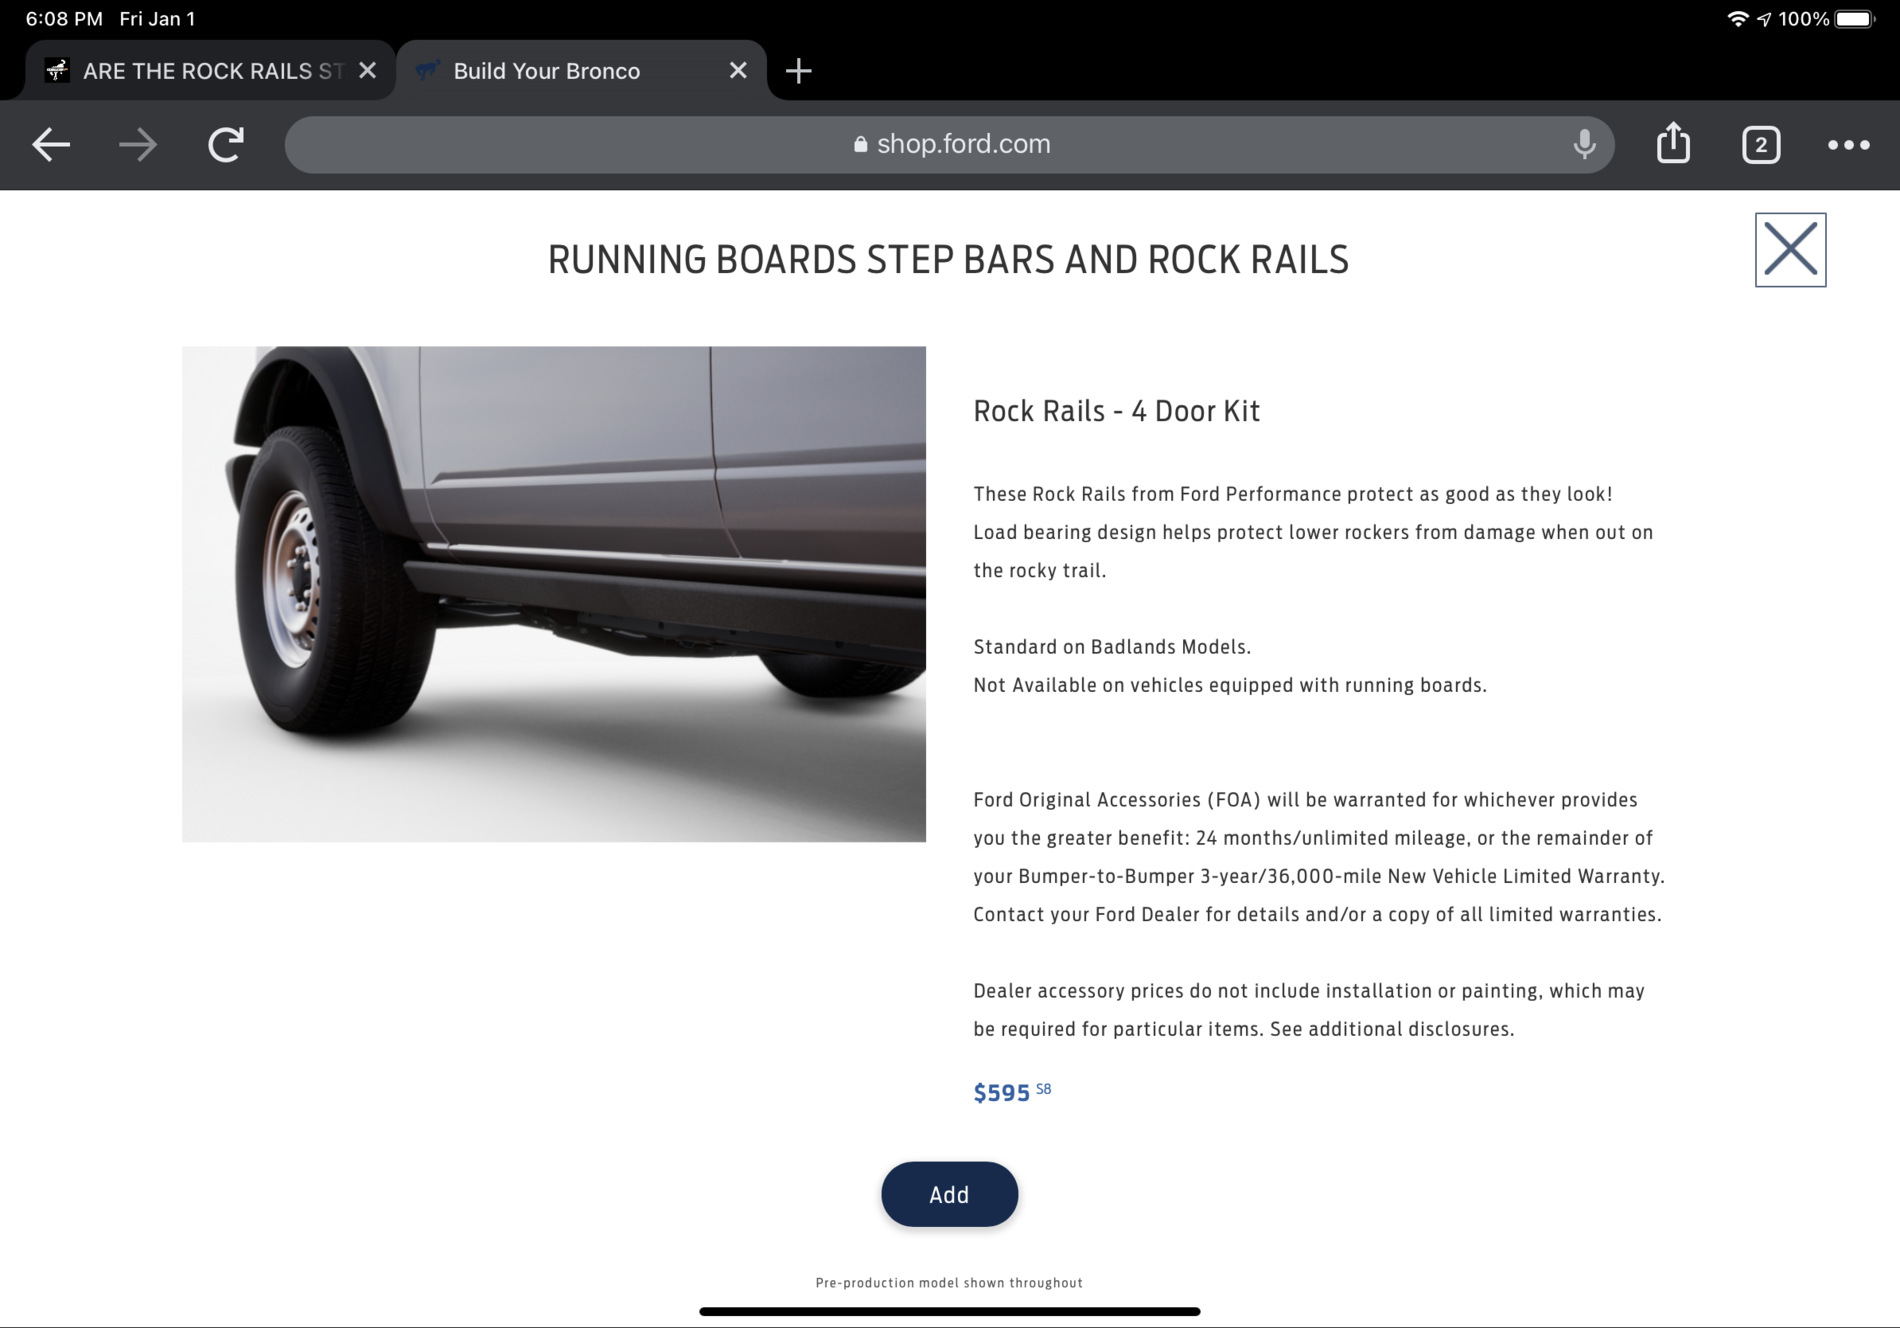 Ford Bronco ARE THE ROCK RAILS STANDARD AND INCLUDED WITH THE BADLANDS, BLACK DIAMOND AND FIRST EDITION????? 2FA98983-2F76-4FBE-8386-5843B6D09399